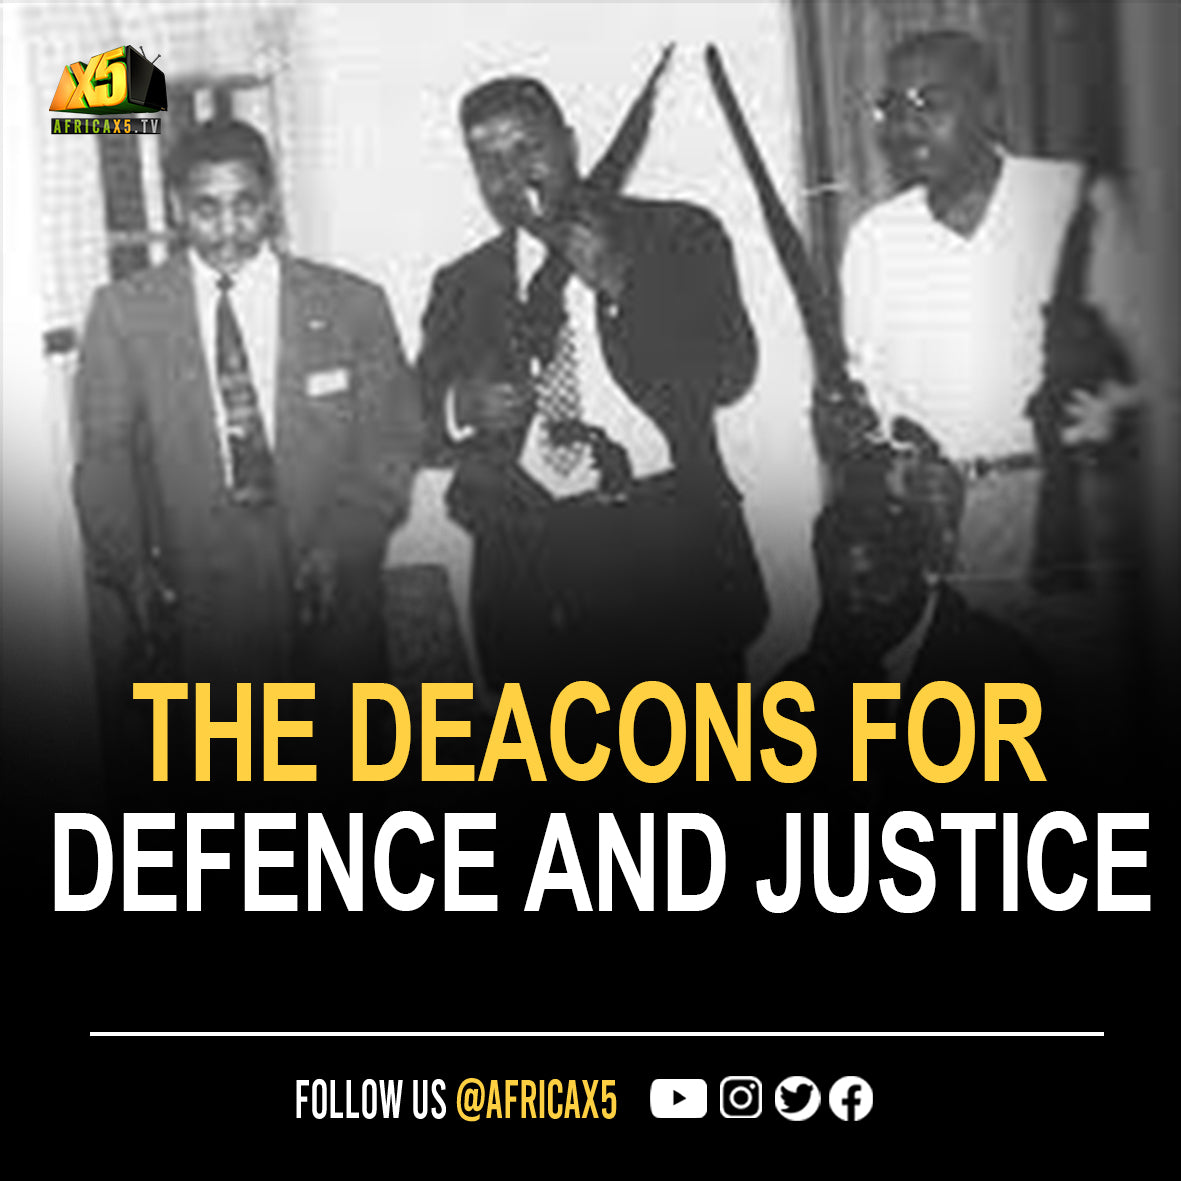 The Deacons for Defense and Justice was an armed Black self defense group who stood up against the KKK and discriminatory treatment by police in the Jim Crow South.